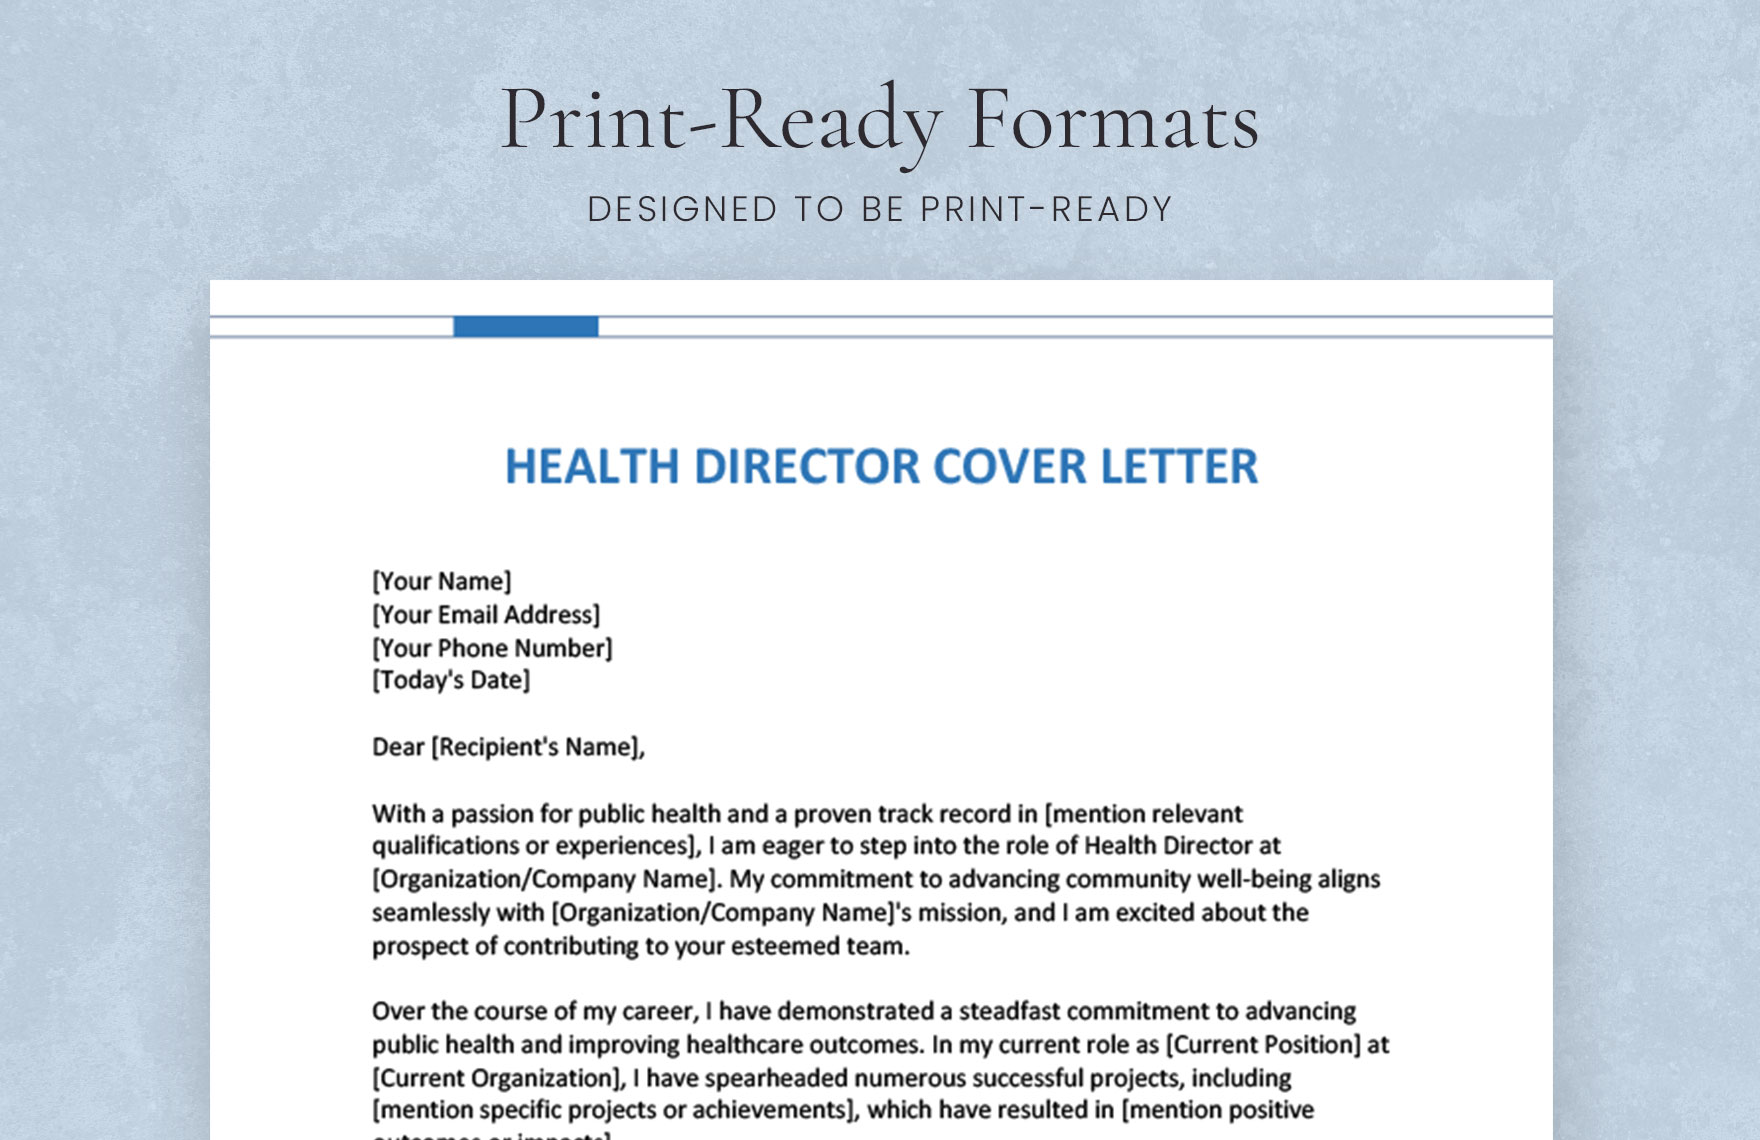 Health Director Cover Letter